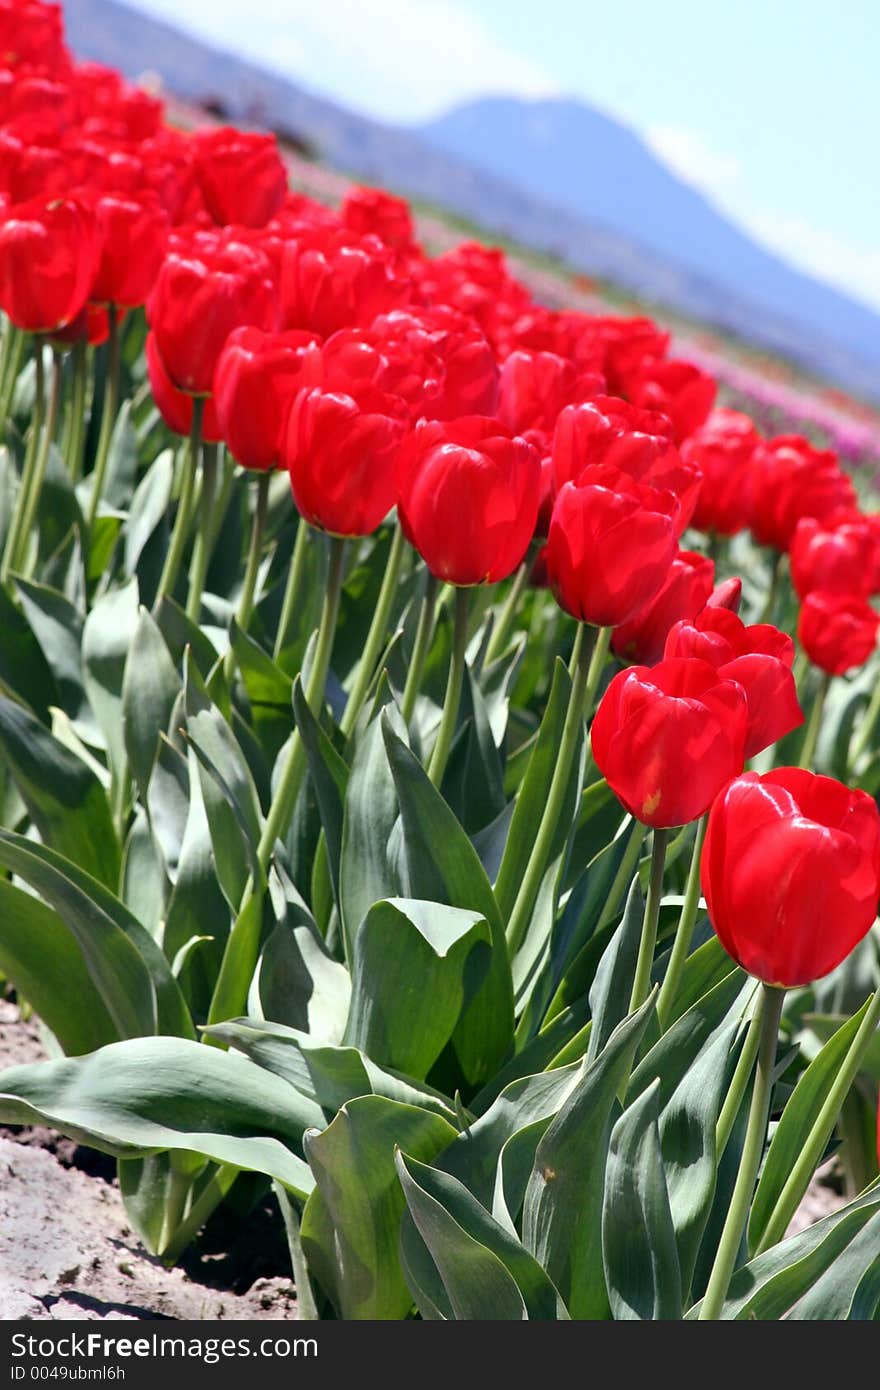 Red tulips turned at a diagonal with a mountain in the background. Red tulips turned at a diagonal with a mountain in the background.